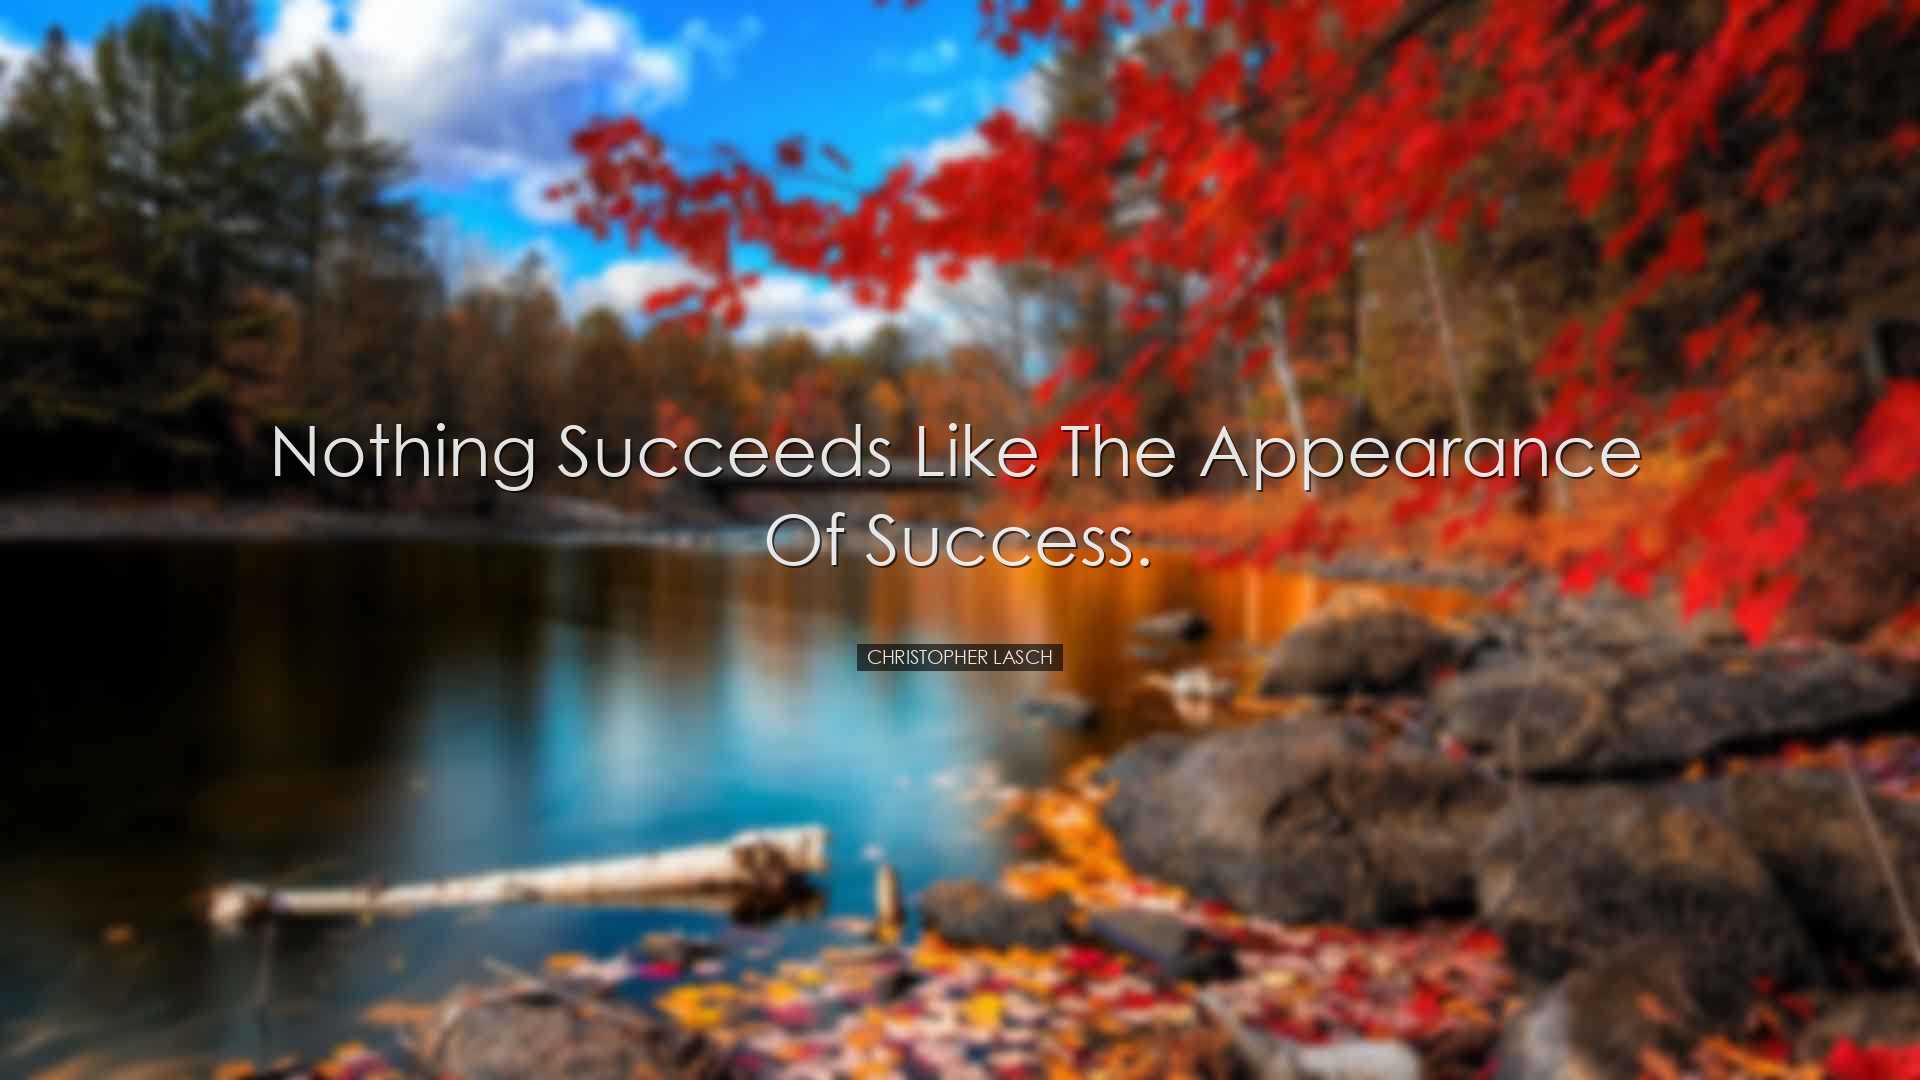 Nothing succeeds like the appearance of success. - Christopher Las